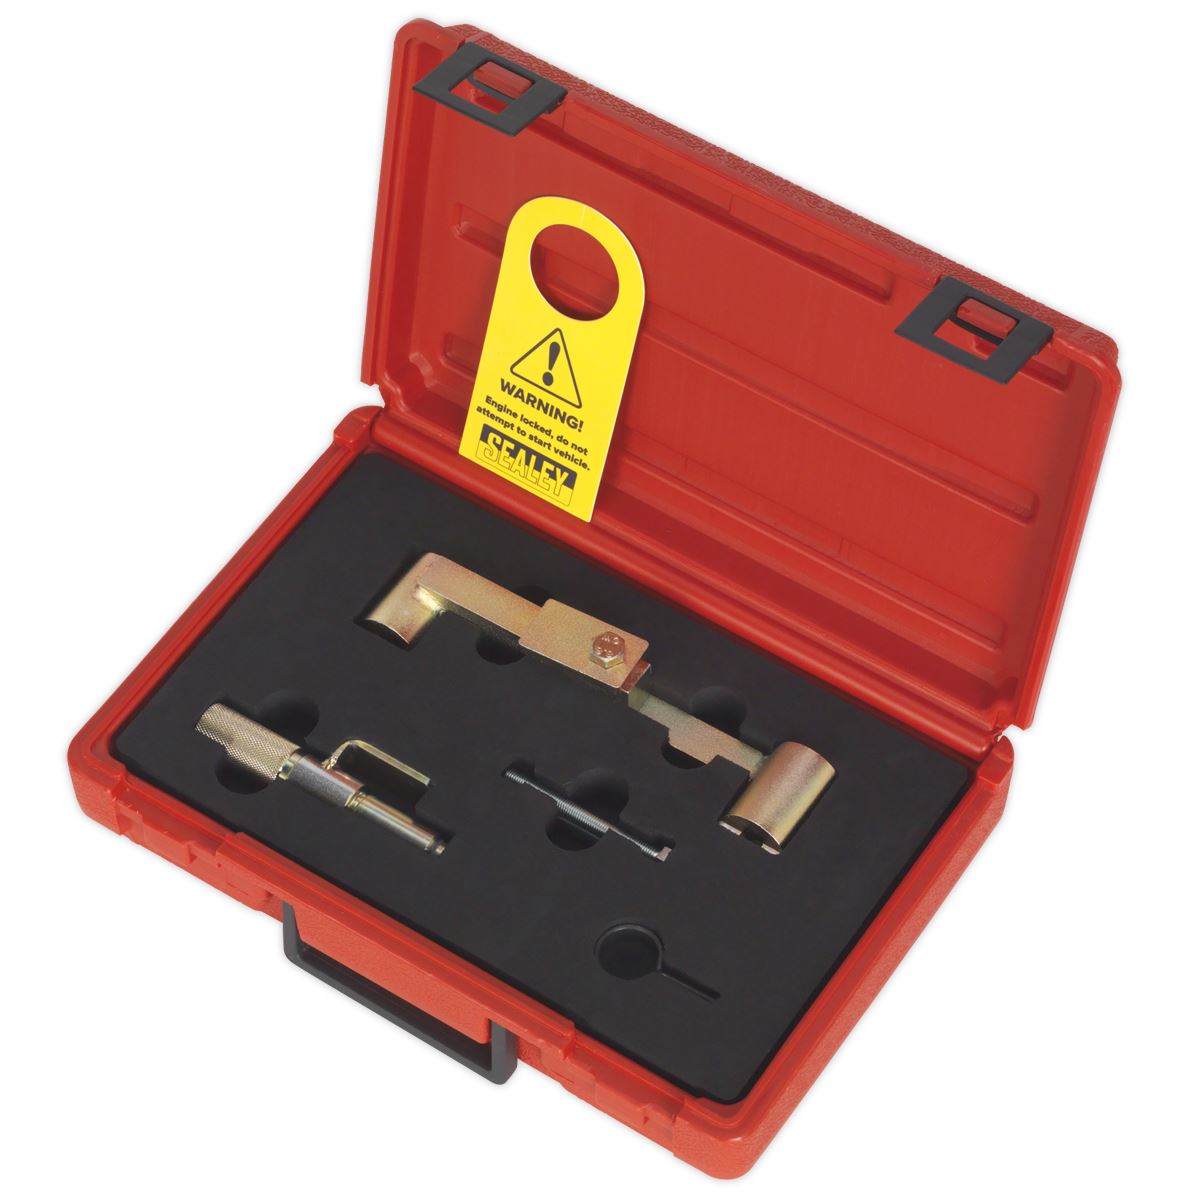 Sealey Petrol Engine Timing Tool Kit - for Ford, Volvo 1.6, 1.8, 2.0, 2.3, 2.4, 2.5, 2.9 - Belt Drive